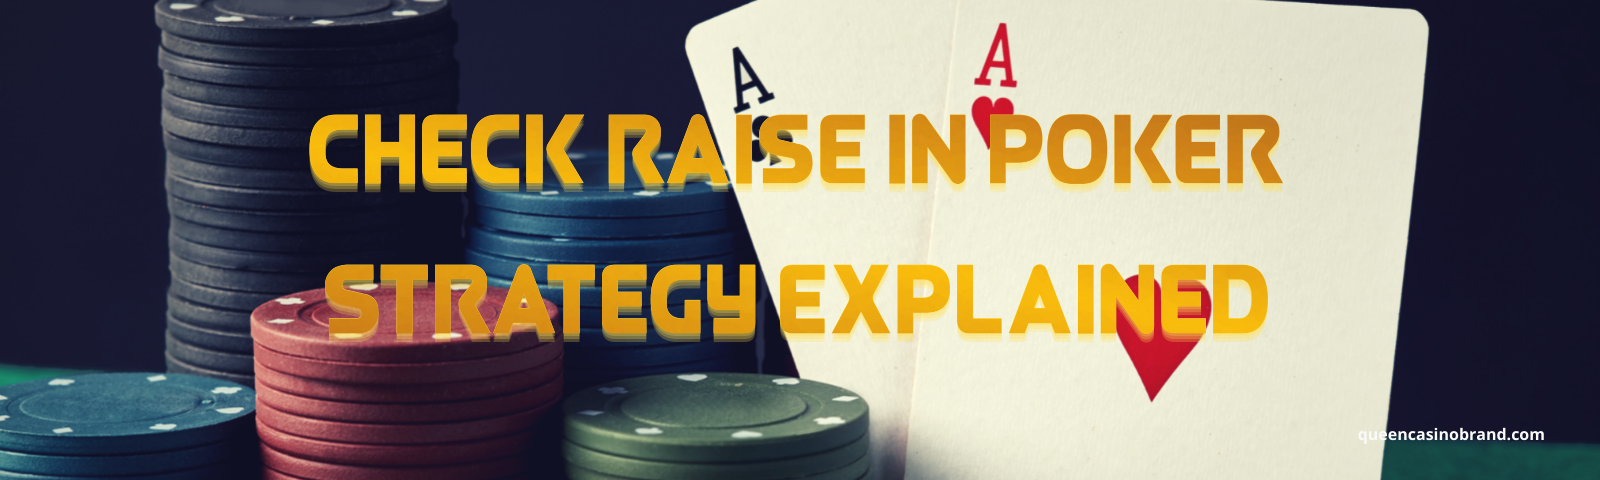 Check Raise in Poker Strategy Explained | Queen Casino Brand